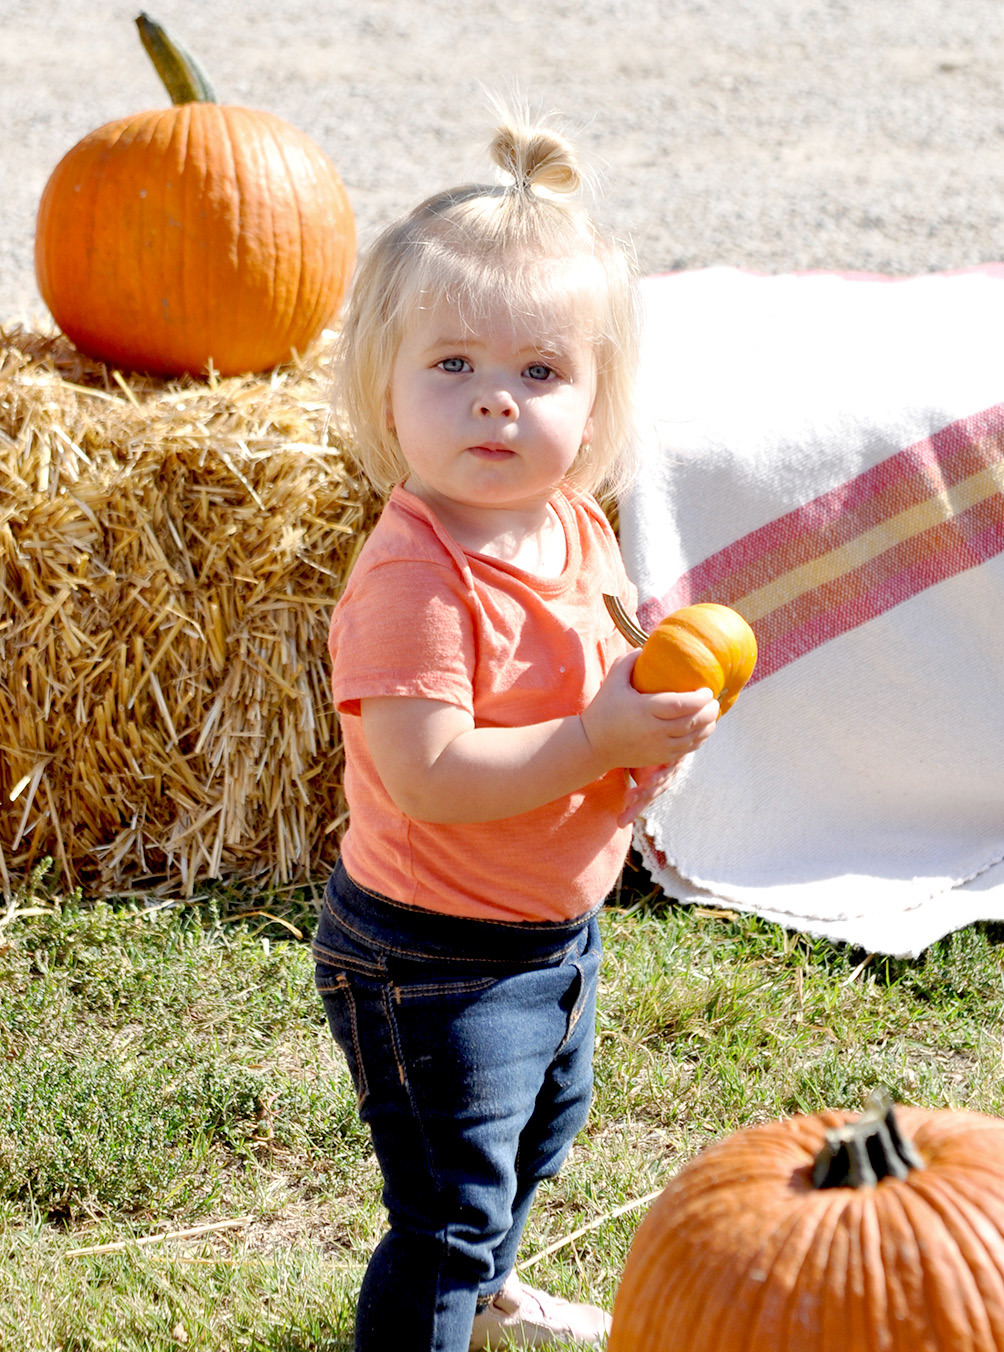 HARPER KELLER is taking the job of picking out a pumpkin very serious, while visiting the Patch last Saturday afternoon. She is the daughter of Anthony and Ali (Miller) Keller of Palco.